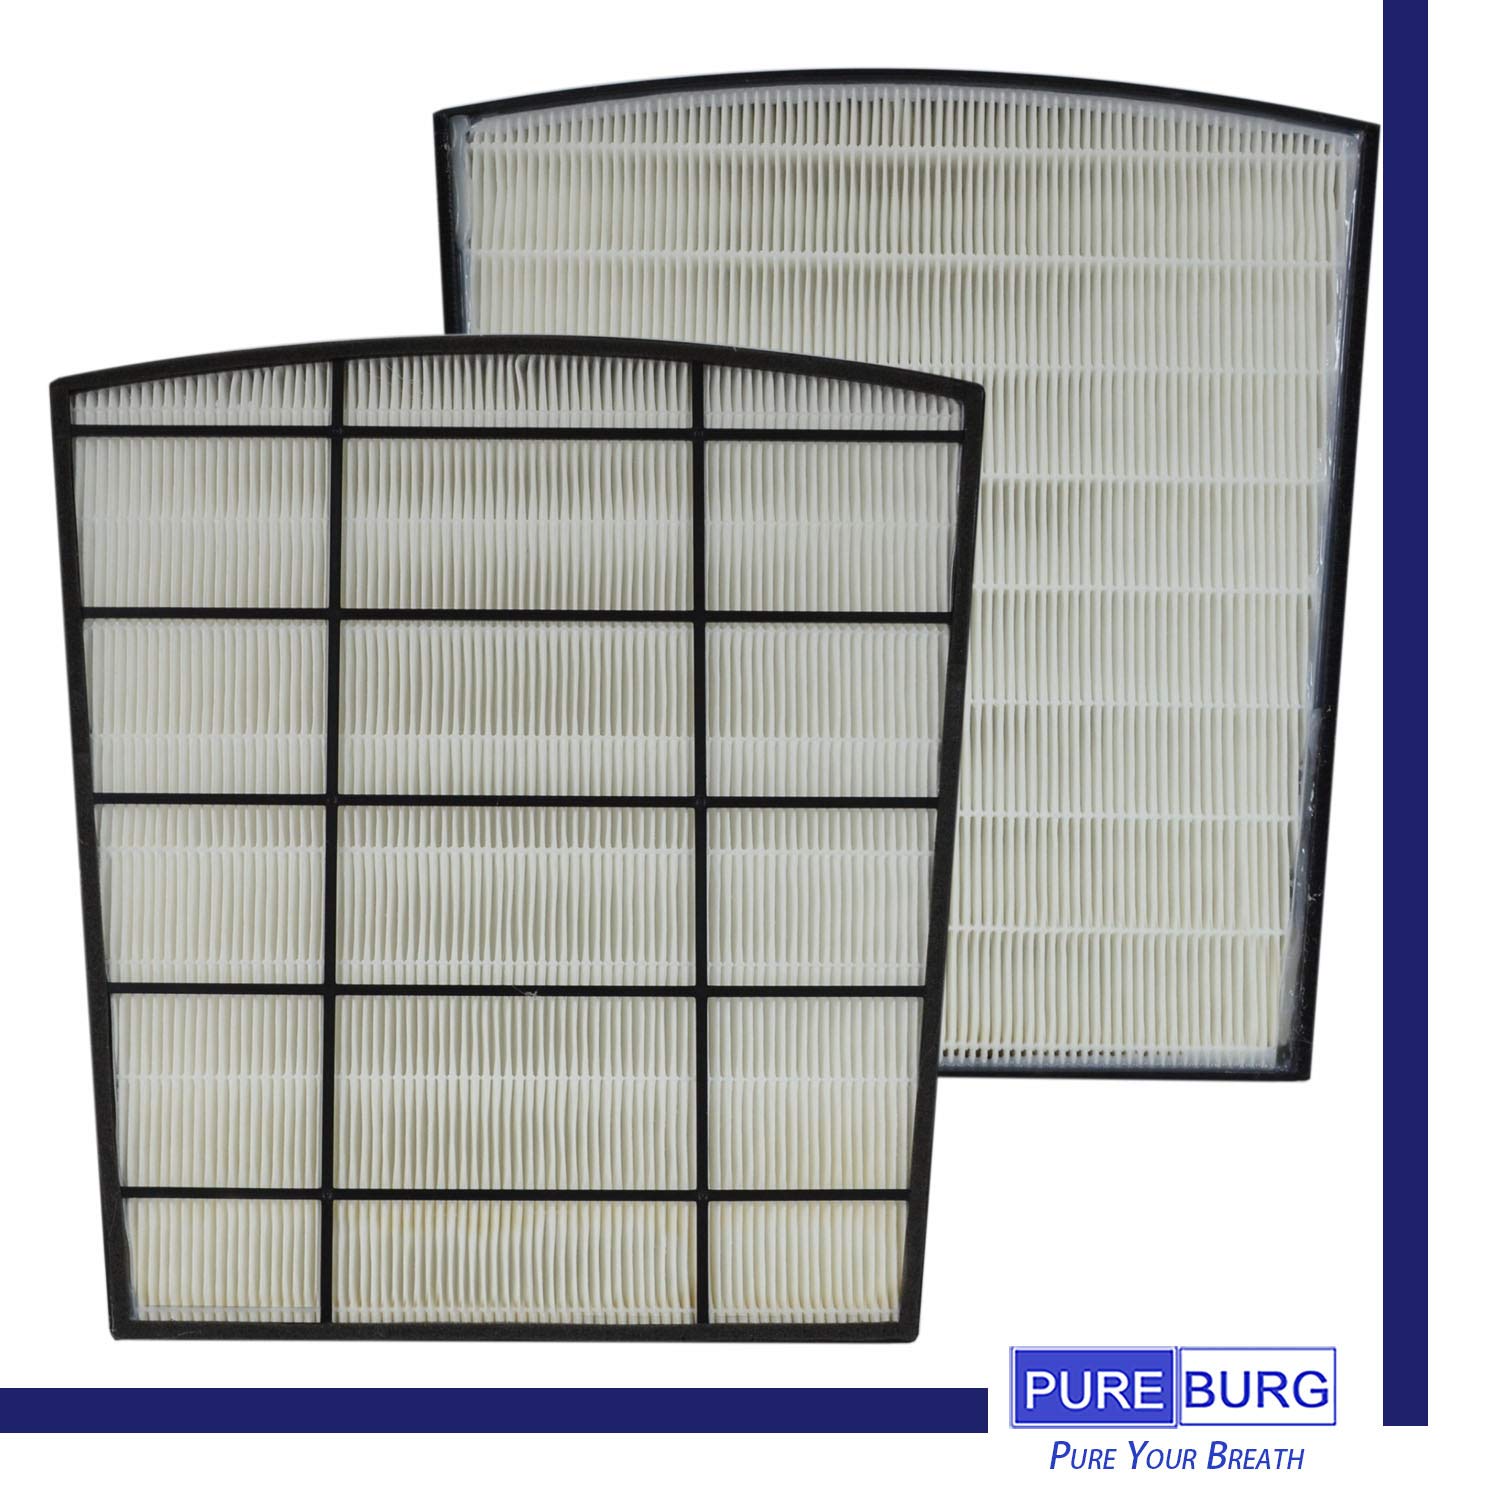 PUREBURG Replacement True HEPA Filter Set Compatible with Hunter HP800 Multi Room Large Console Air Purifier, Part Number H-HF800-VP H-PF800,H13 Activated carbon Pre-Filter Air Clean Dust VOCs